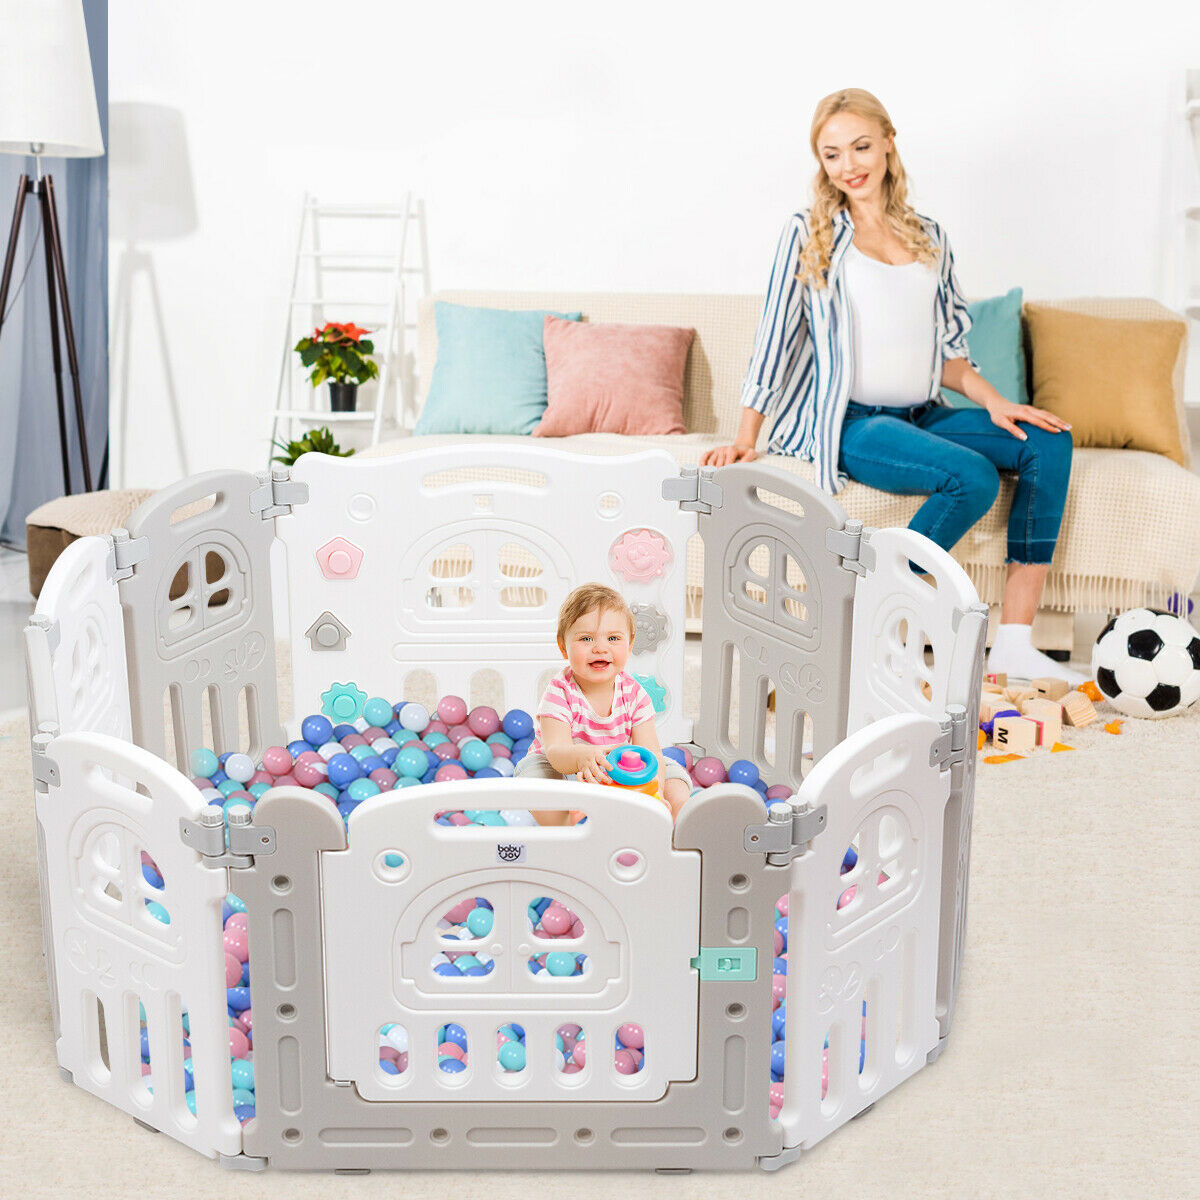 10-Panel Foldable Baby Playpen Kids Activity Centre W/ Tray Table & Desk